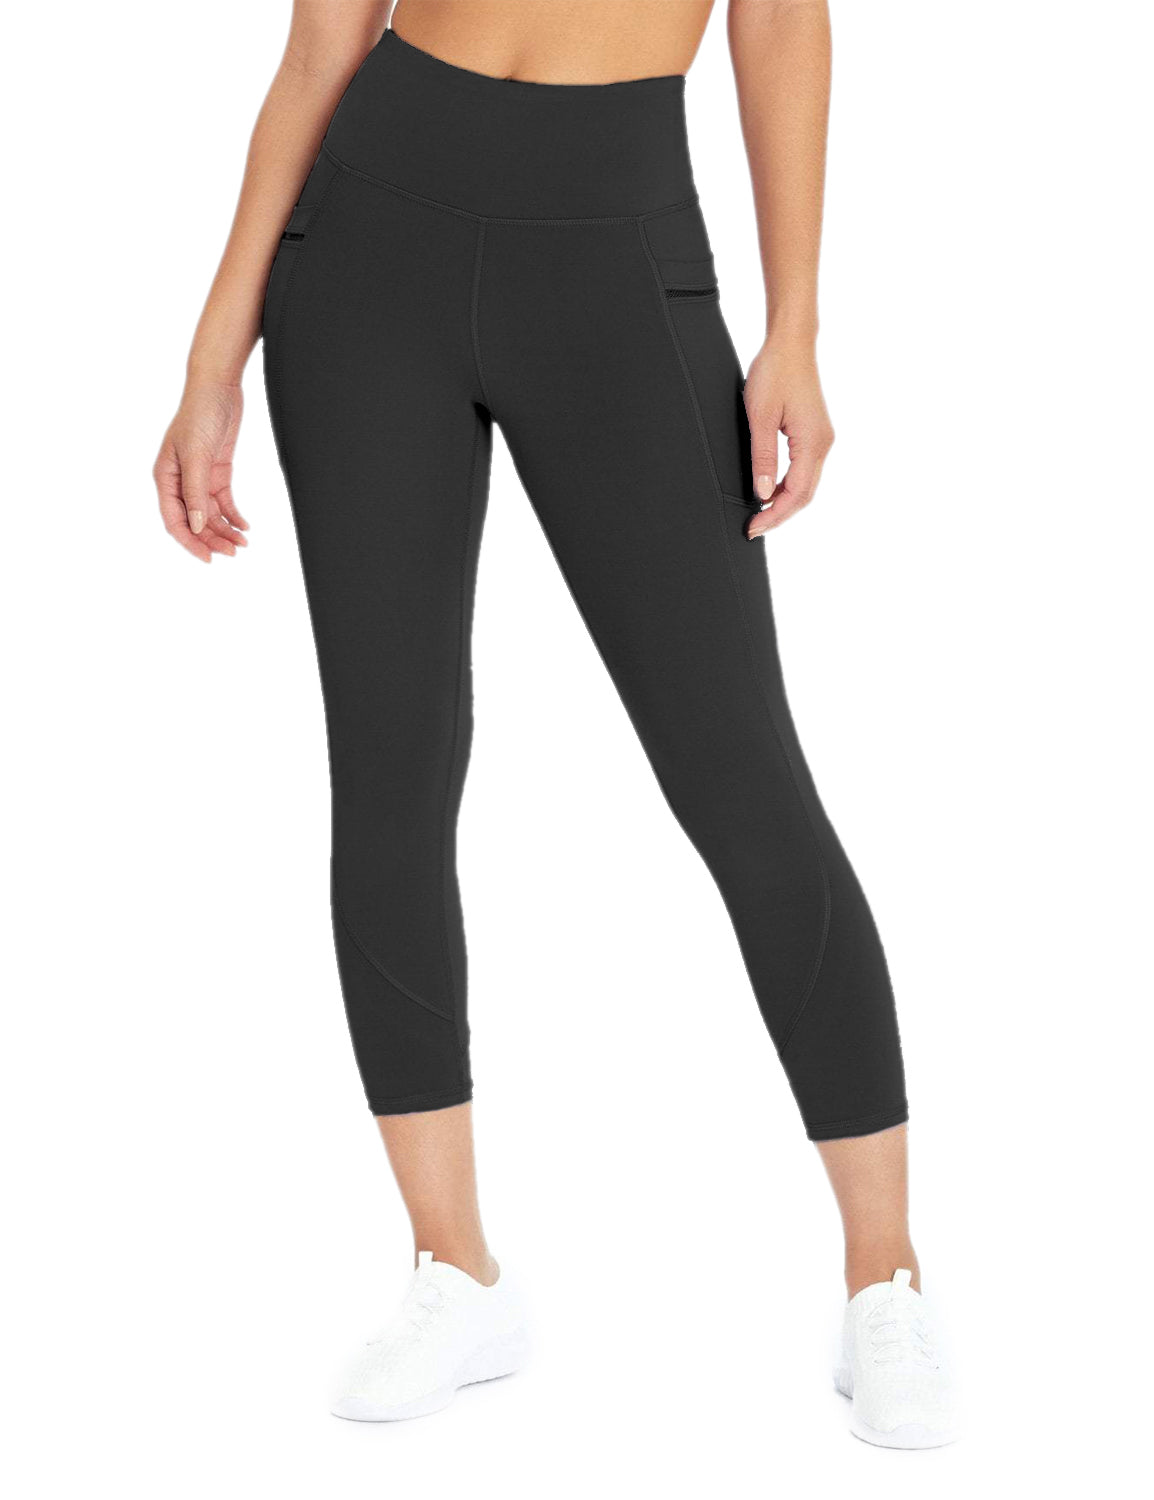 Blooming Jelly_Stretchy High Waisted Capri Leggings_Black_255022_02_Women Athletic High Elascity Workout_Bottoms_Leggings